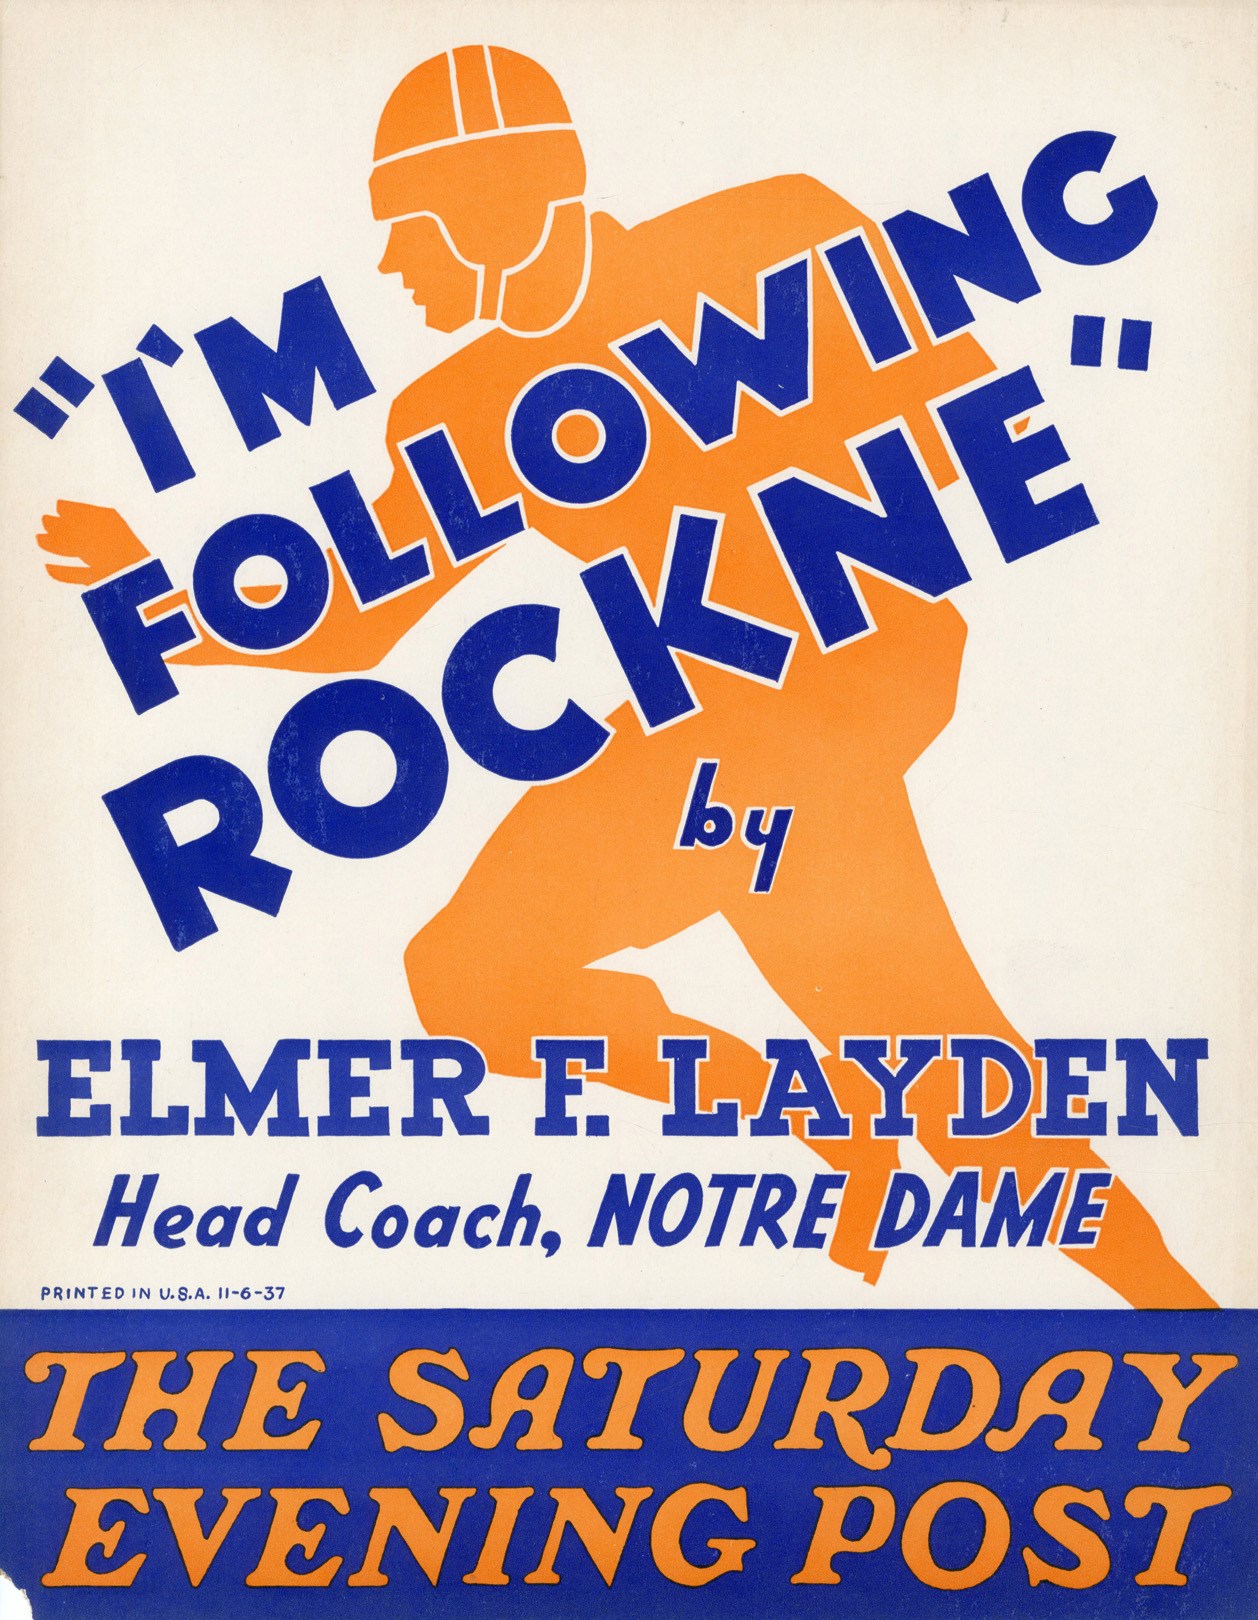 Internet Only - 1937 Knute Rockne Saturday Evening Post Advertising Poster